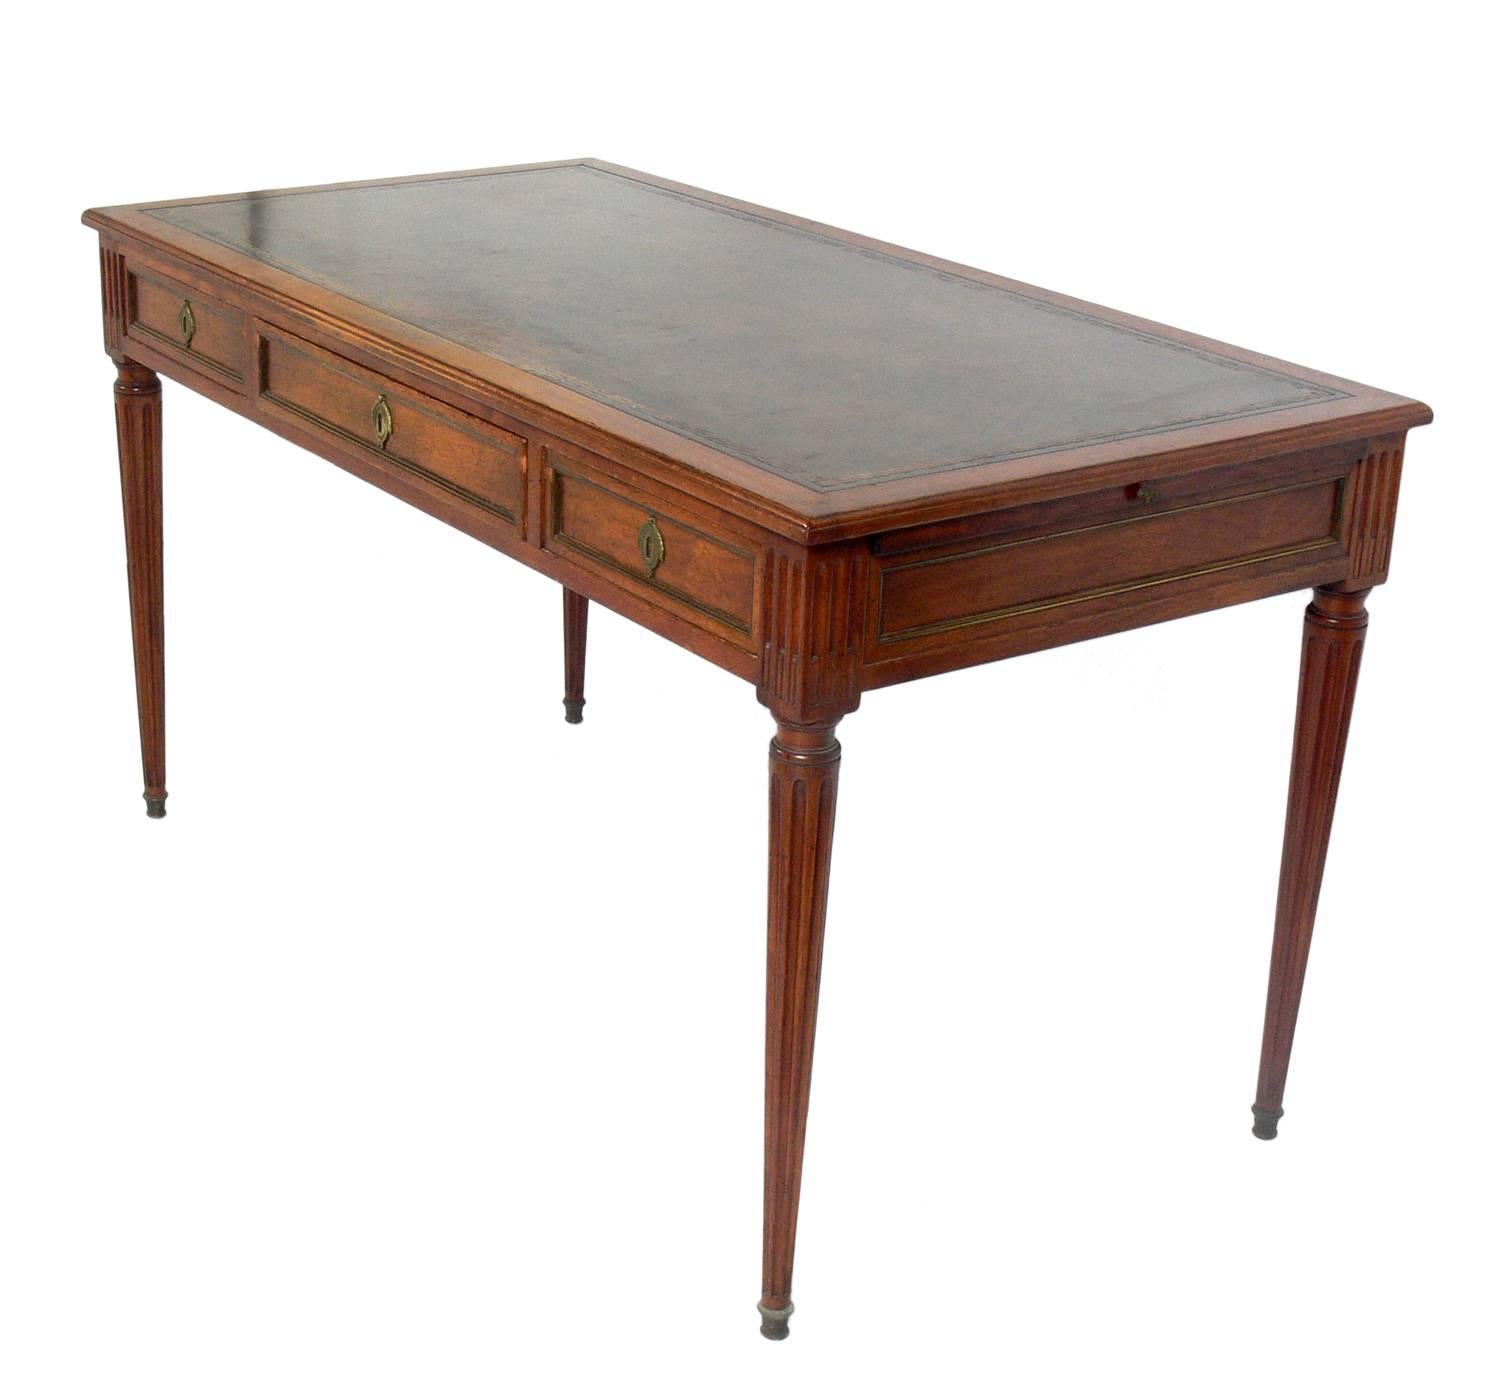 Elegant leather top French desk or bureau plat believed to be circa 1950s, possibly earlier. Imported by legendary NYC antique dealer Don Ruseau. It features an elegant leather top with embossed Greek key pattern.